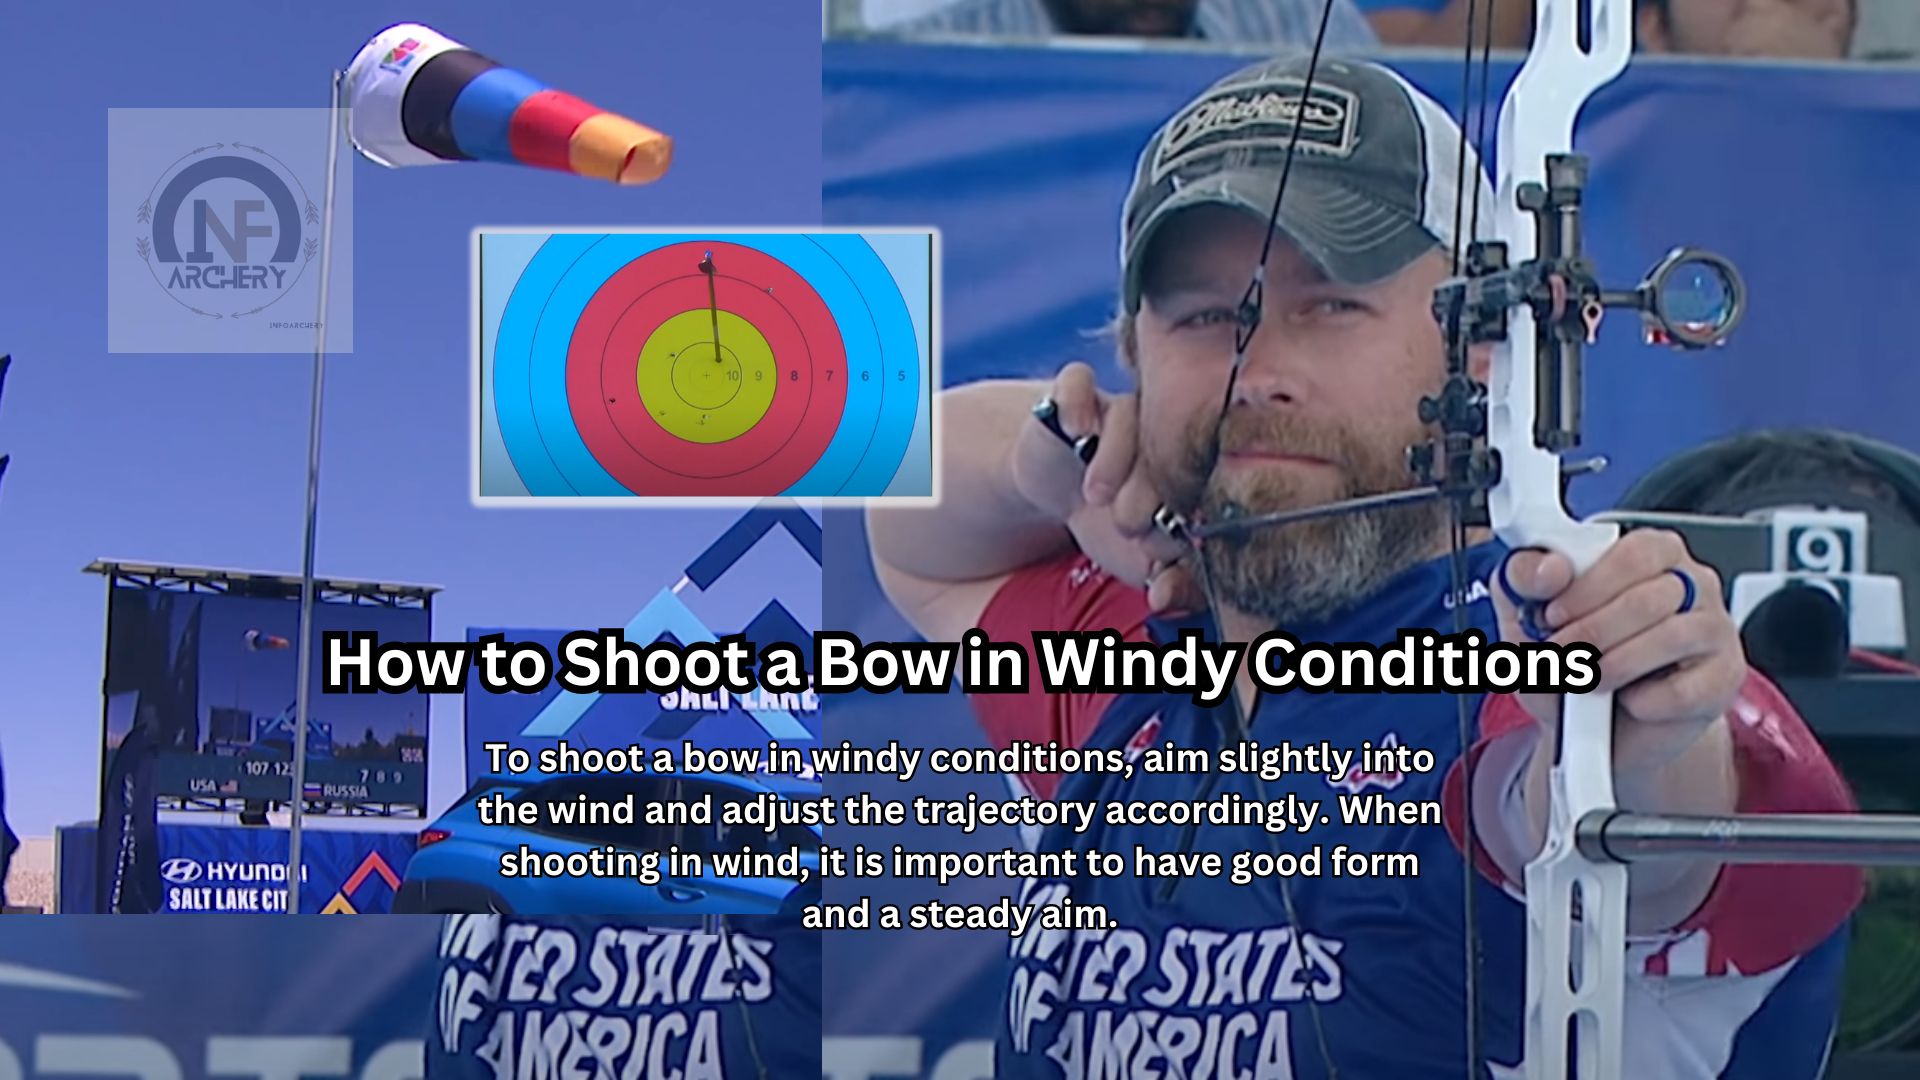 How to Shoot a Bow in Windy Conditions